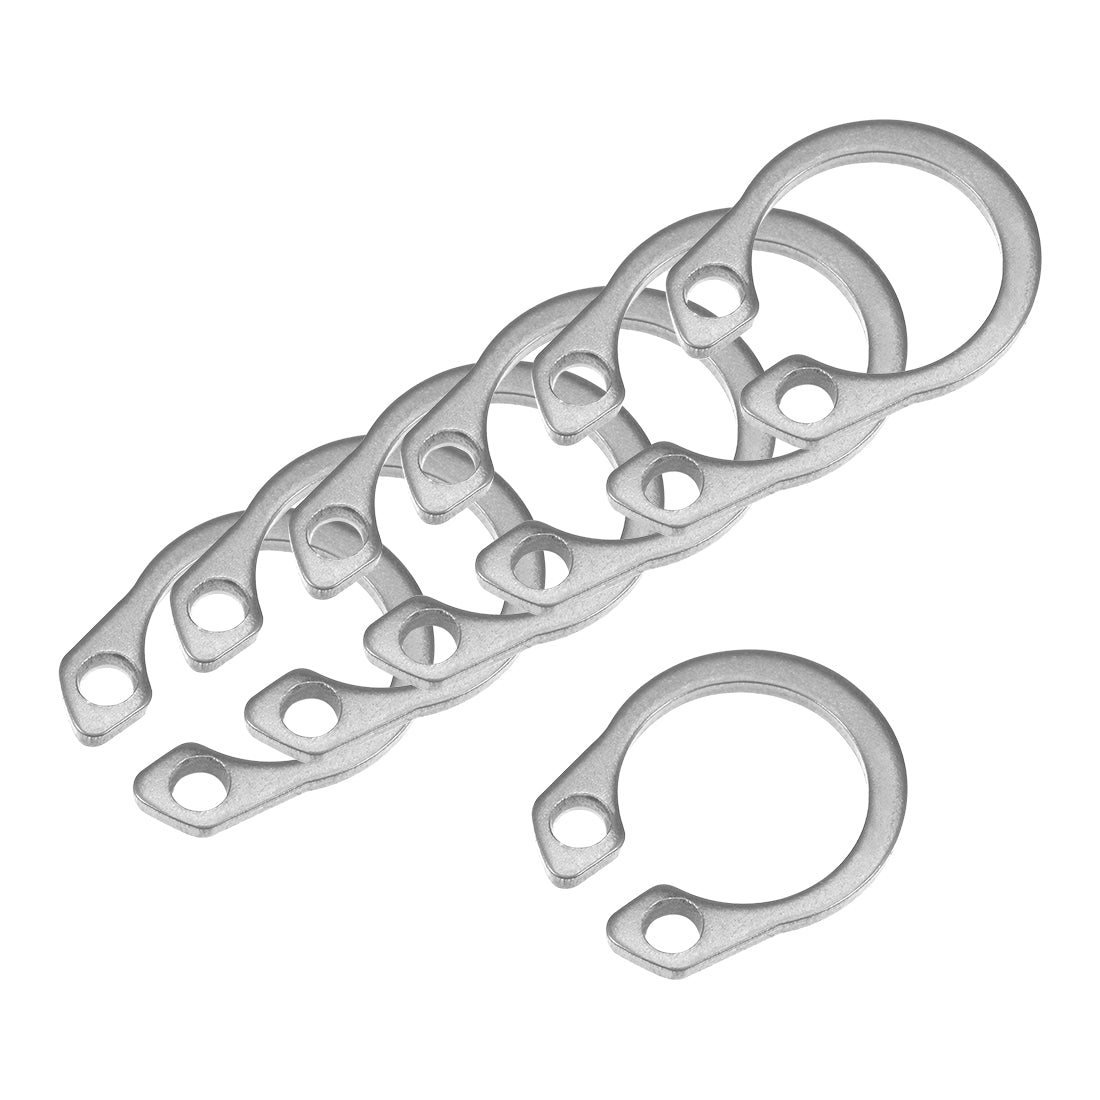 uxcell Uxcell 11.7mm External Circlips Retaining Shaft Snap Rings 304 Stainless Steel 50pcs